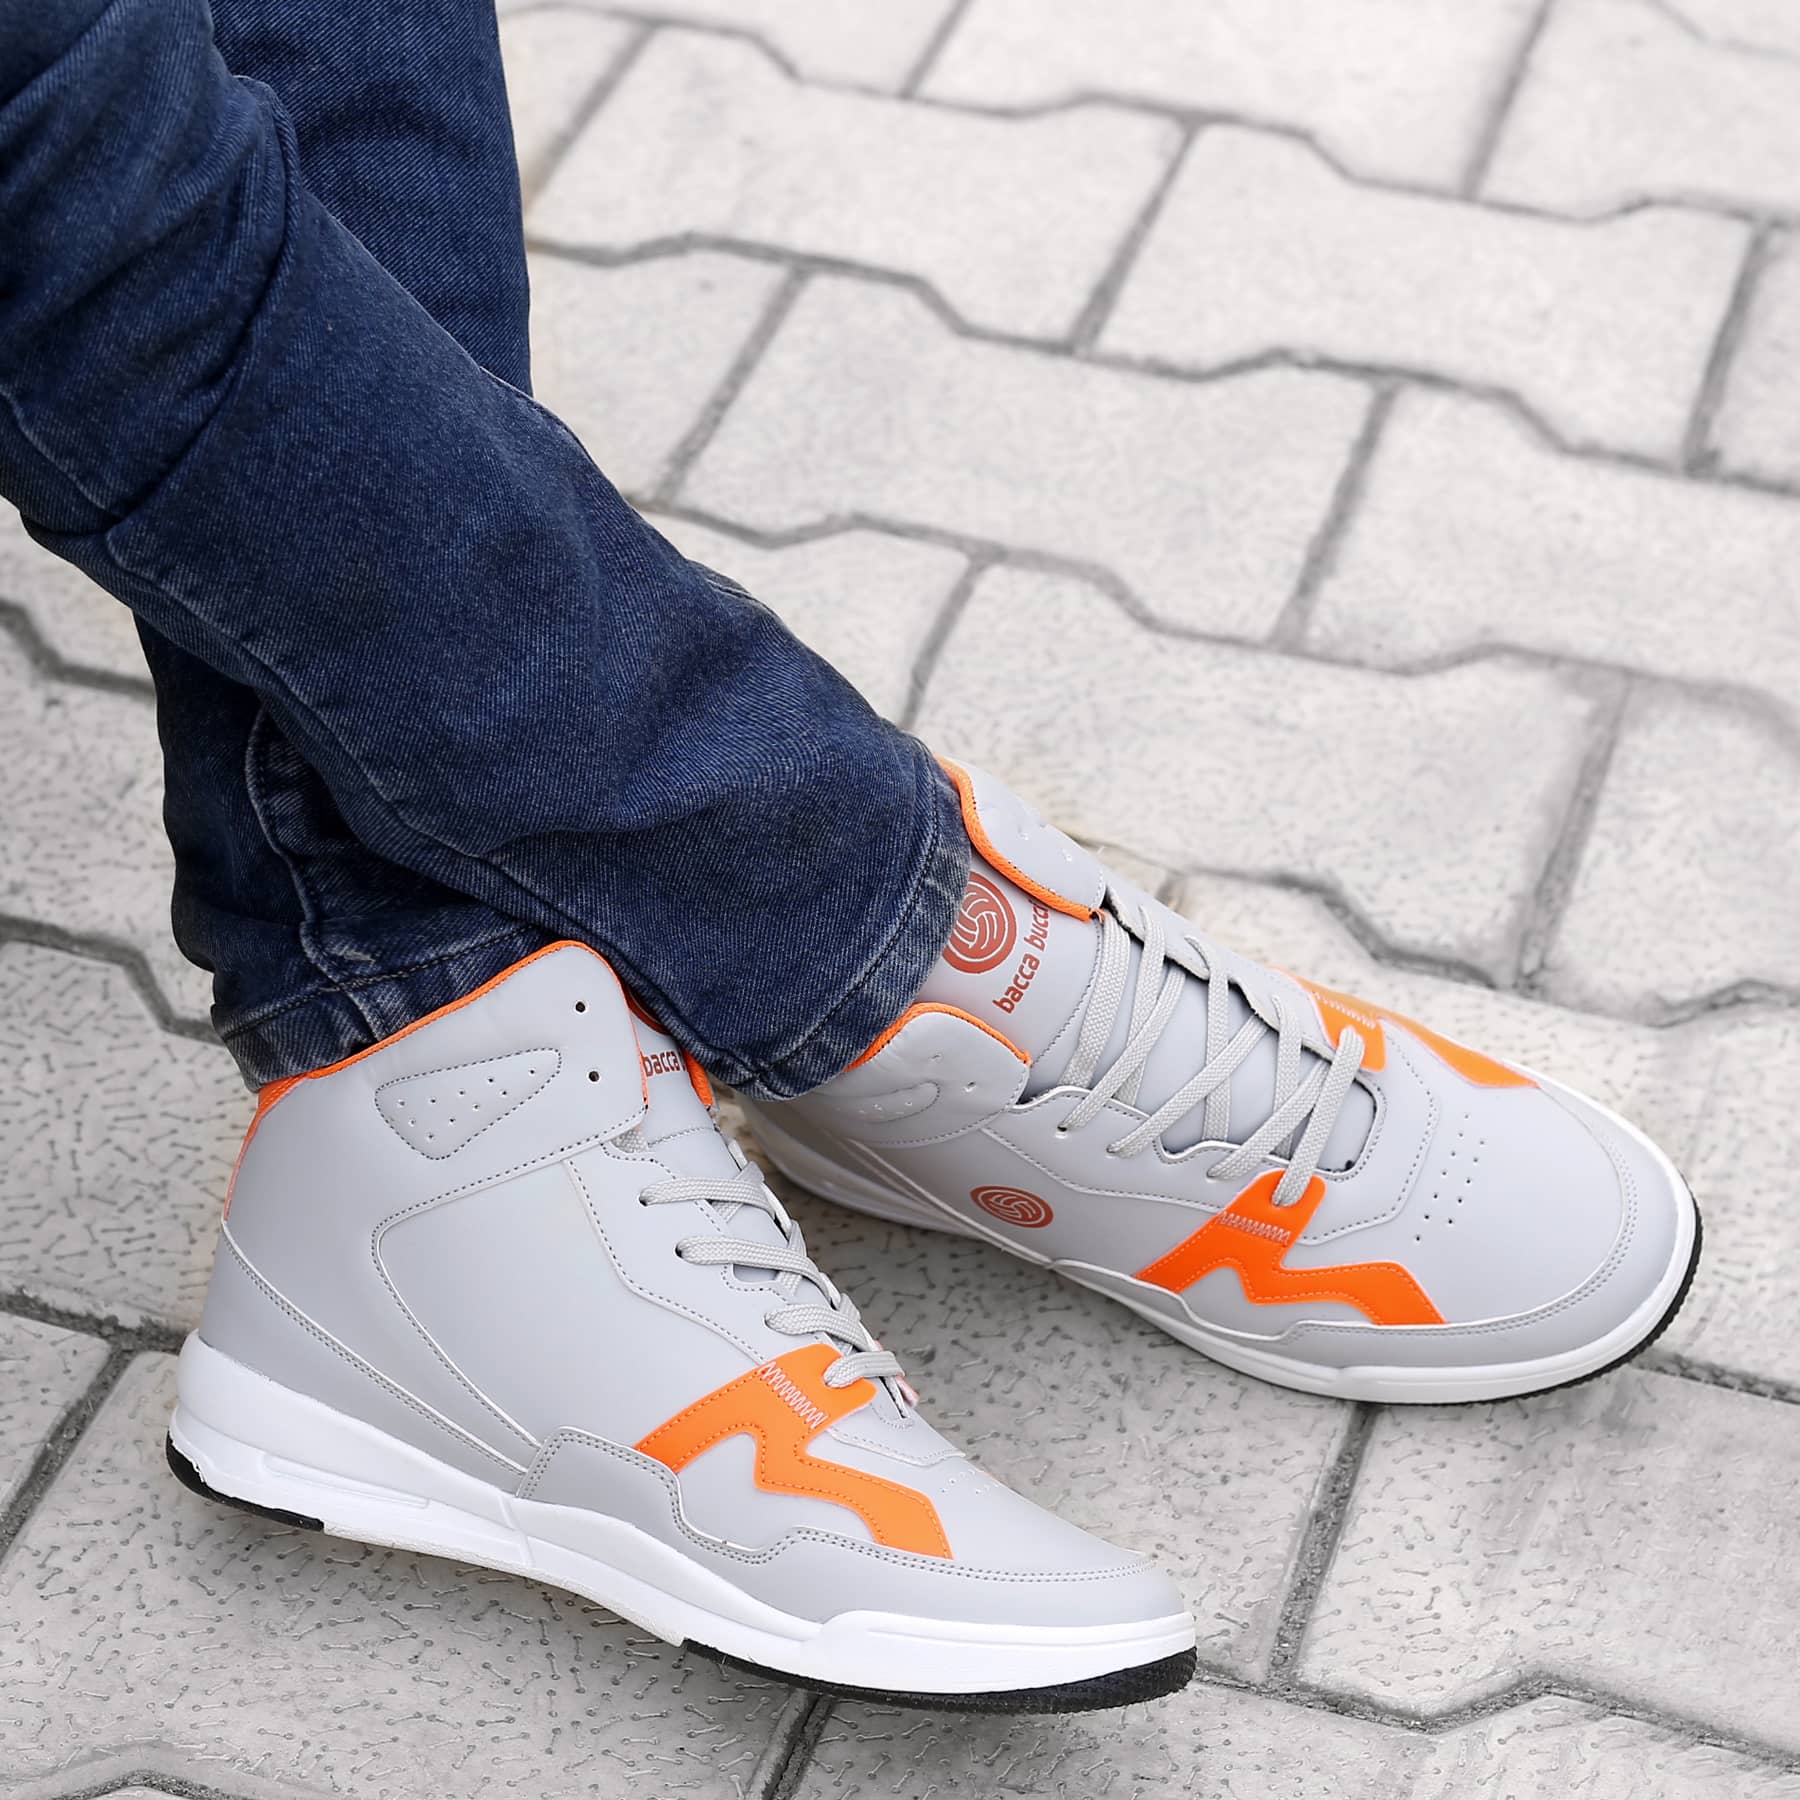  mid top sneakers for men, mid top sneakers mens, mens fashion sneakers, mid top running shoes